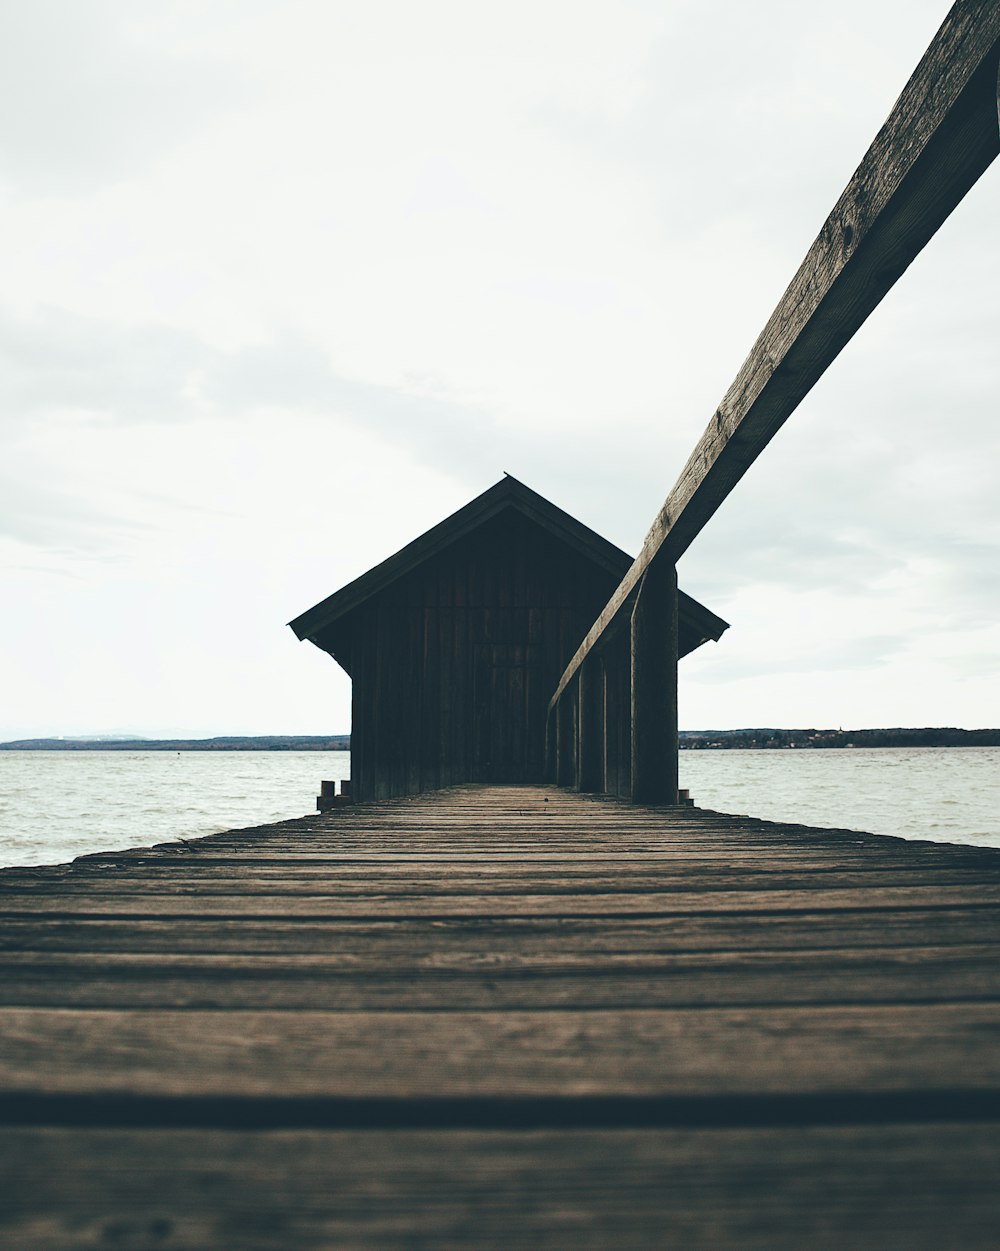 a wooden dock with a house on top of it